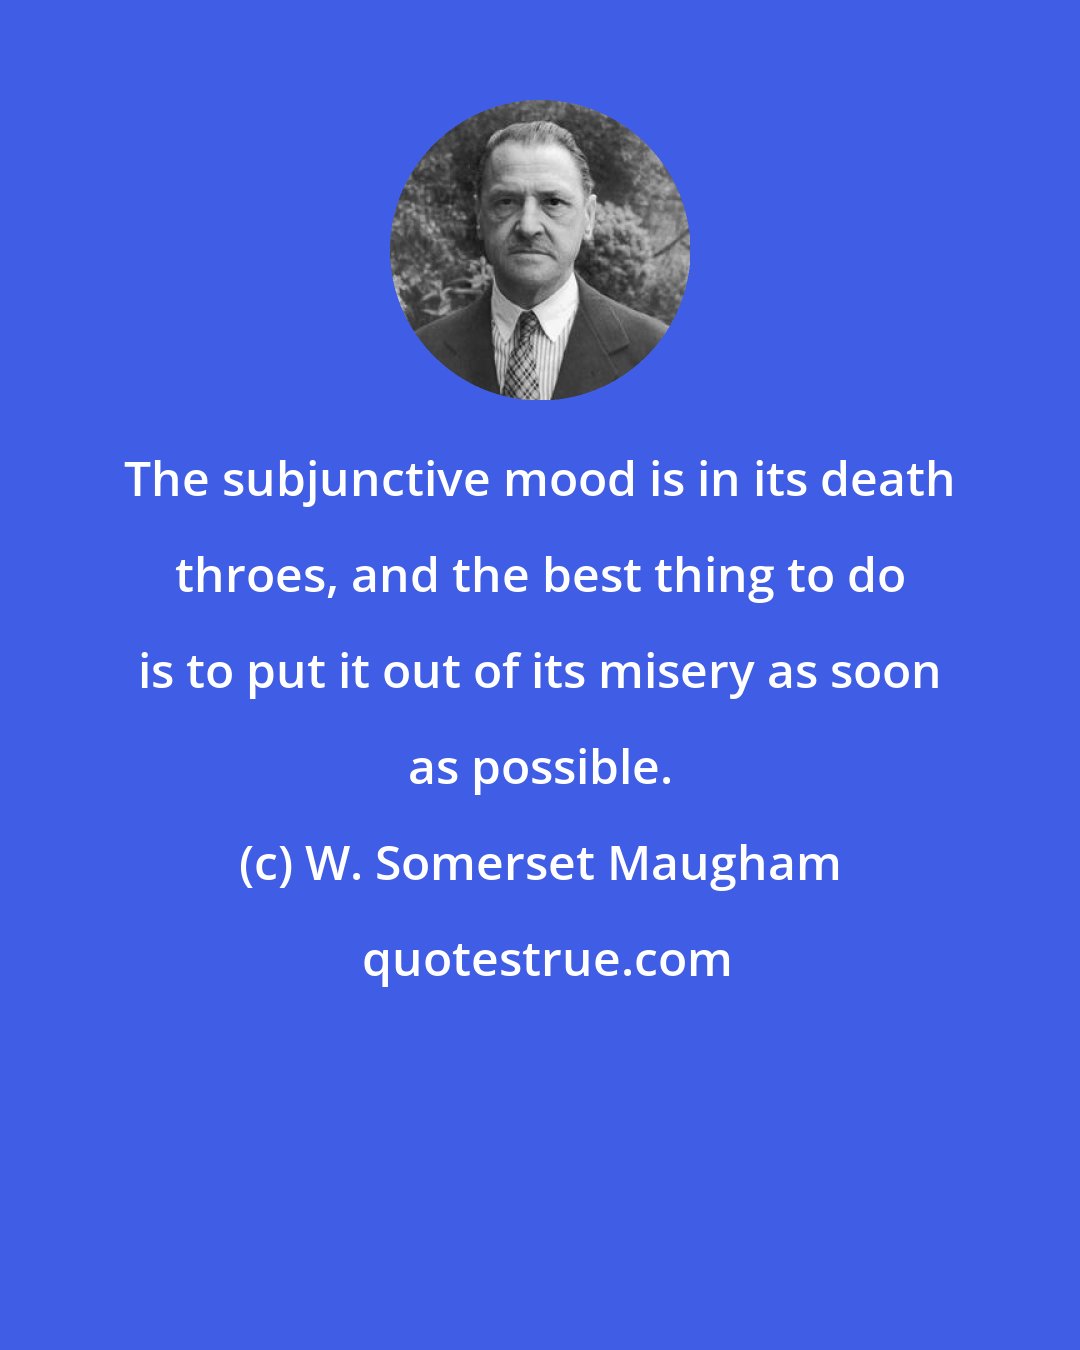 W. Somerset Maugham: The subjunctive mood is in its death throes, and the best thing to do is to put it out of its misery as soon as possible.